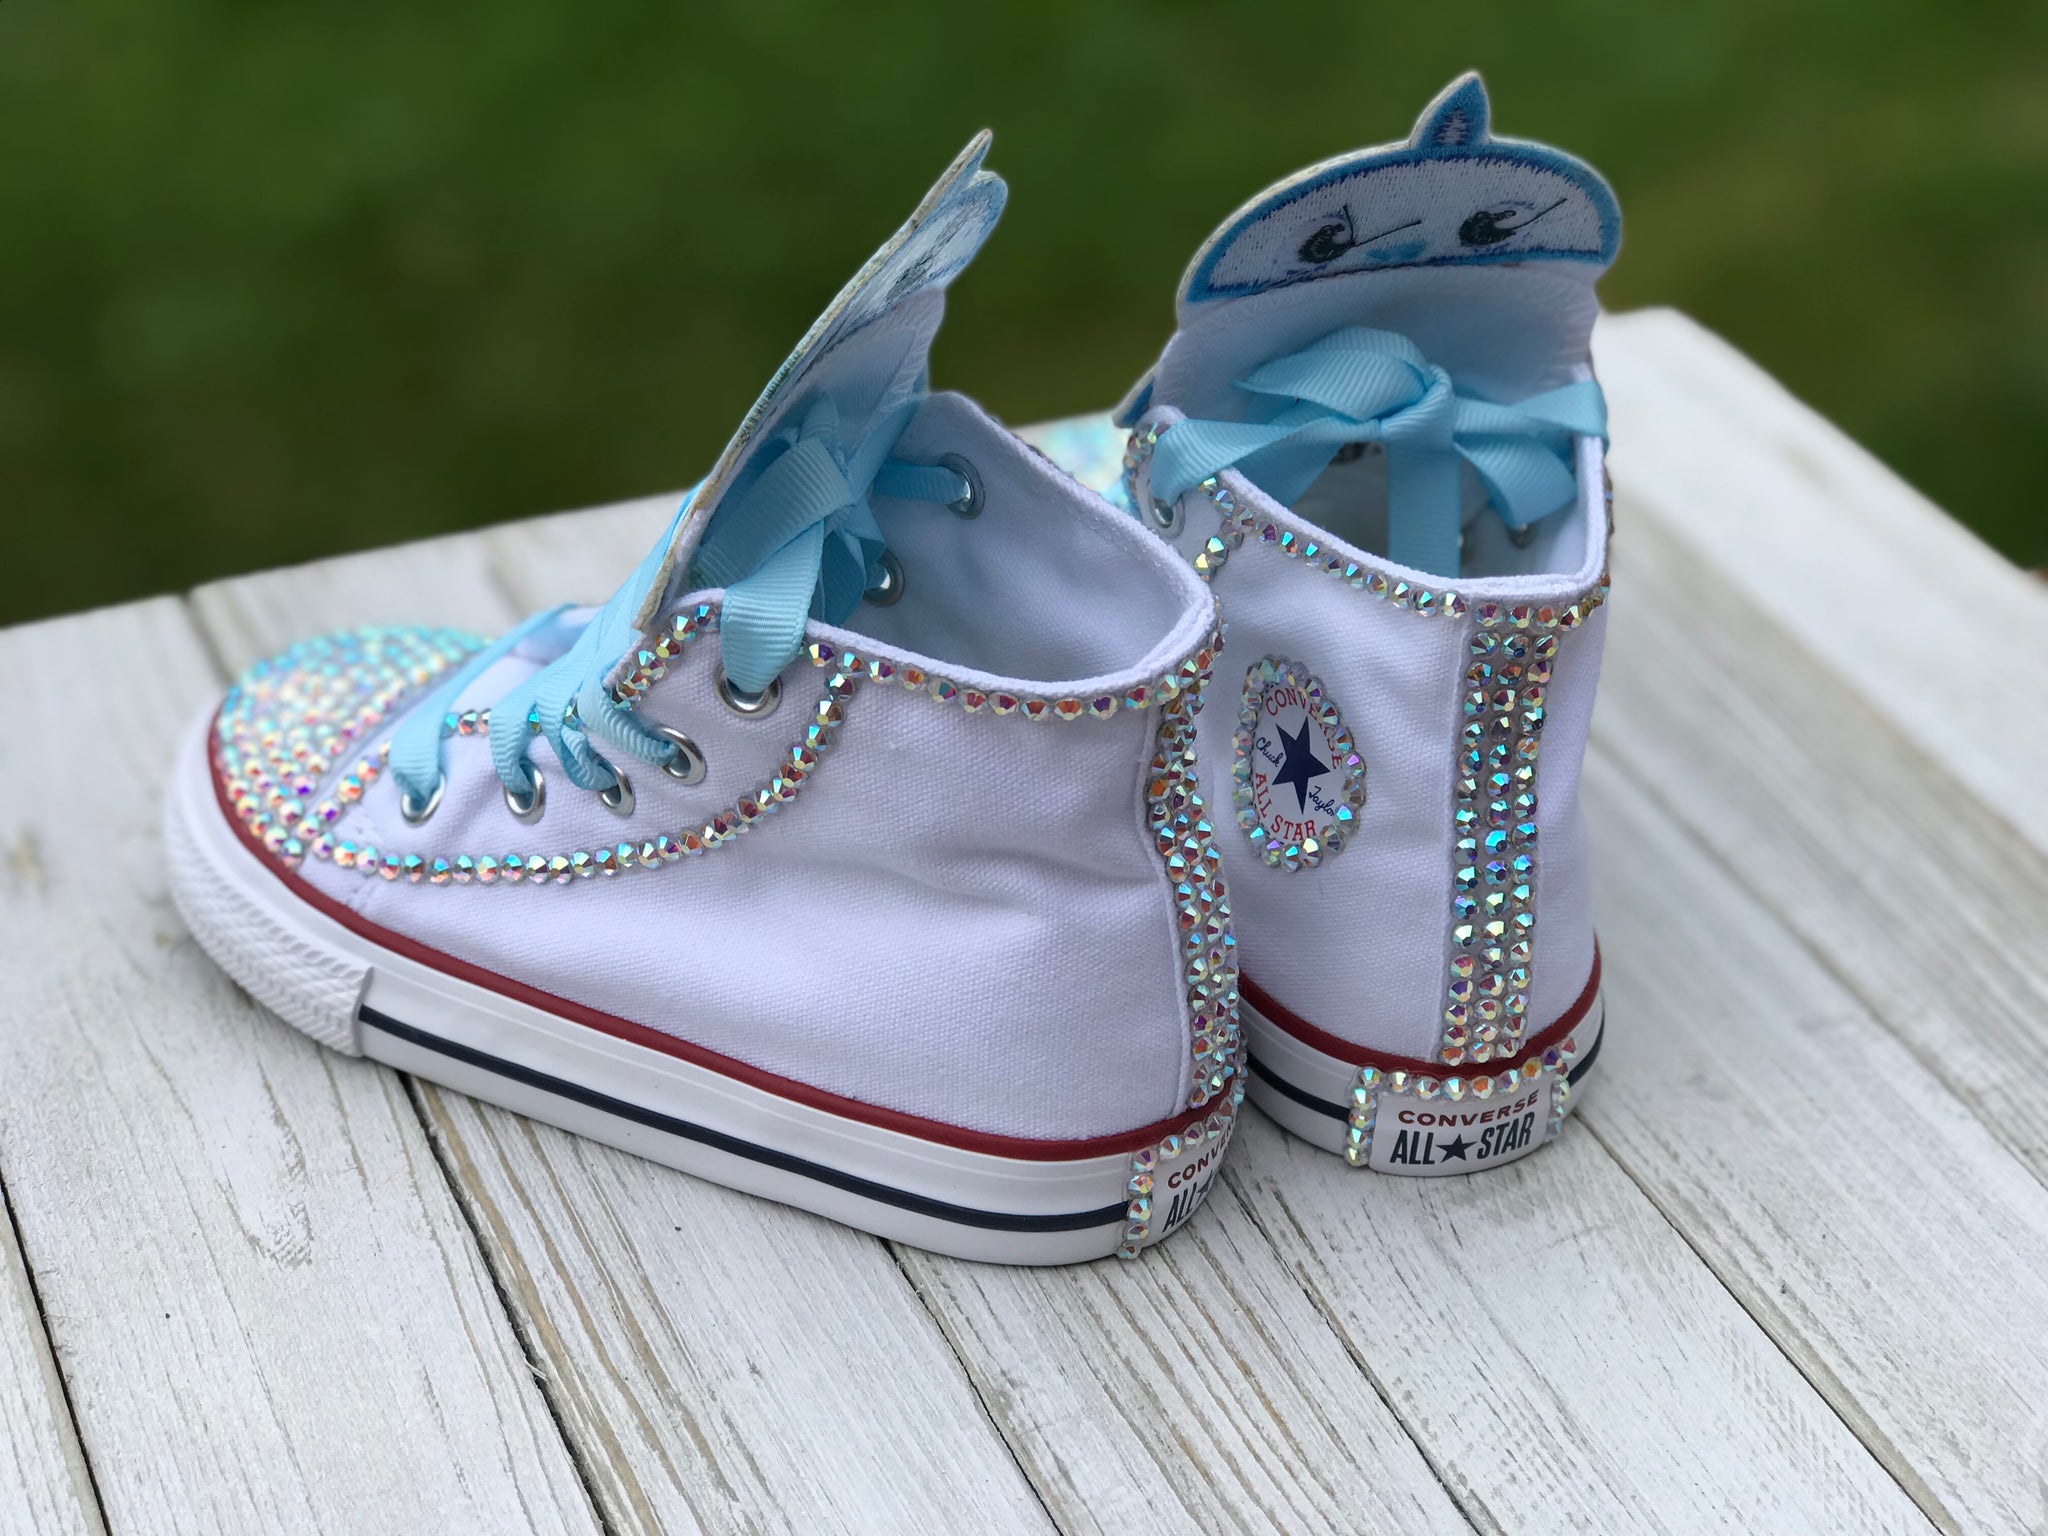 Red Star Baby Girl Fancy Shoes, 6 MONTH TO 7 YEAR